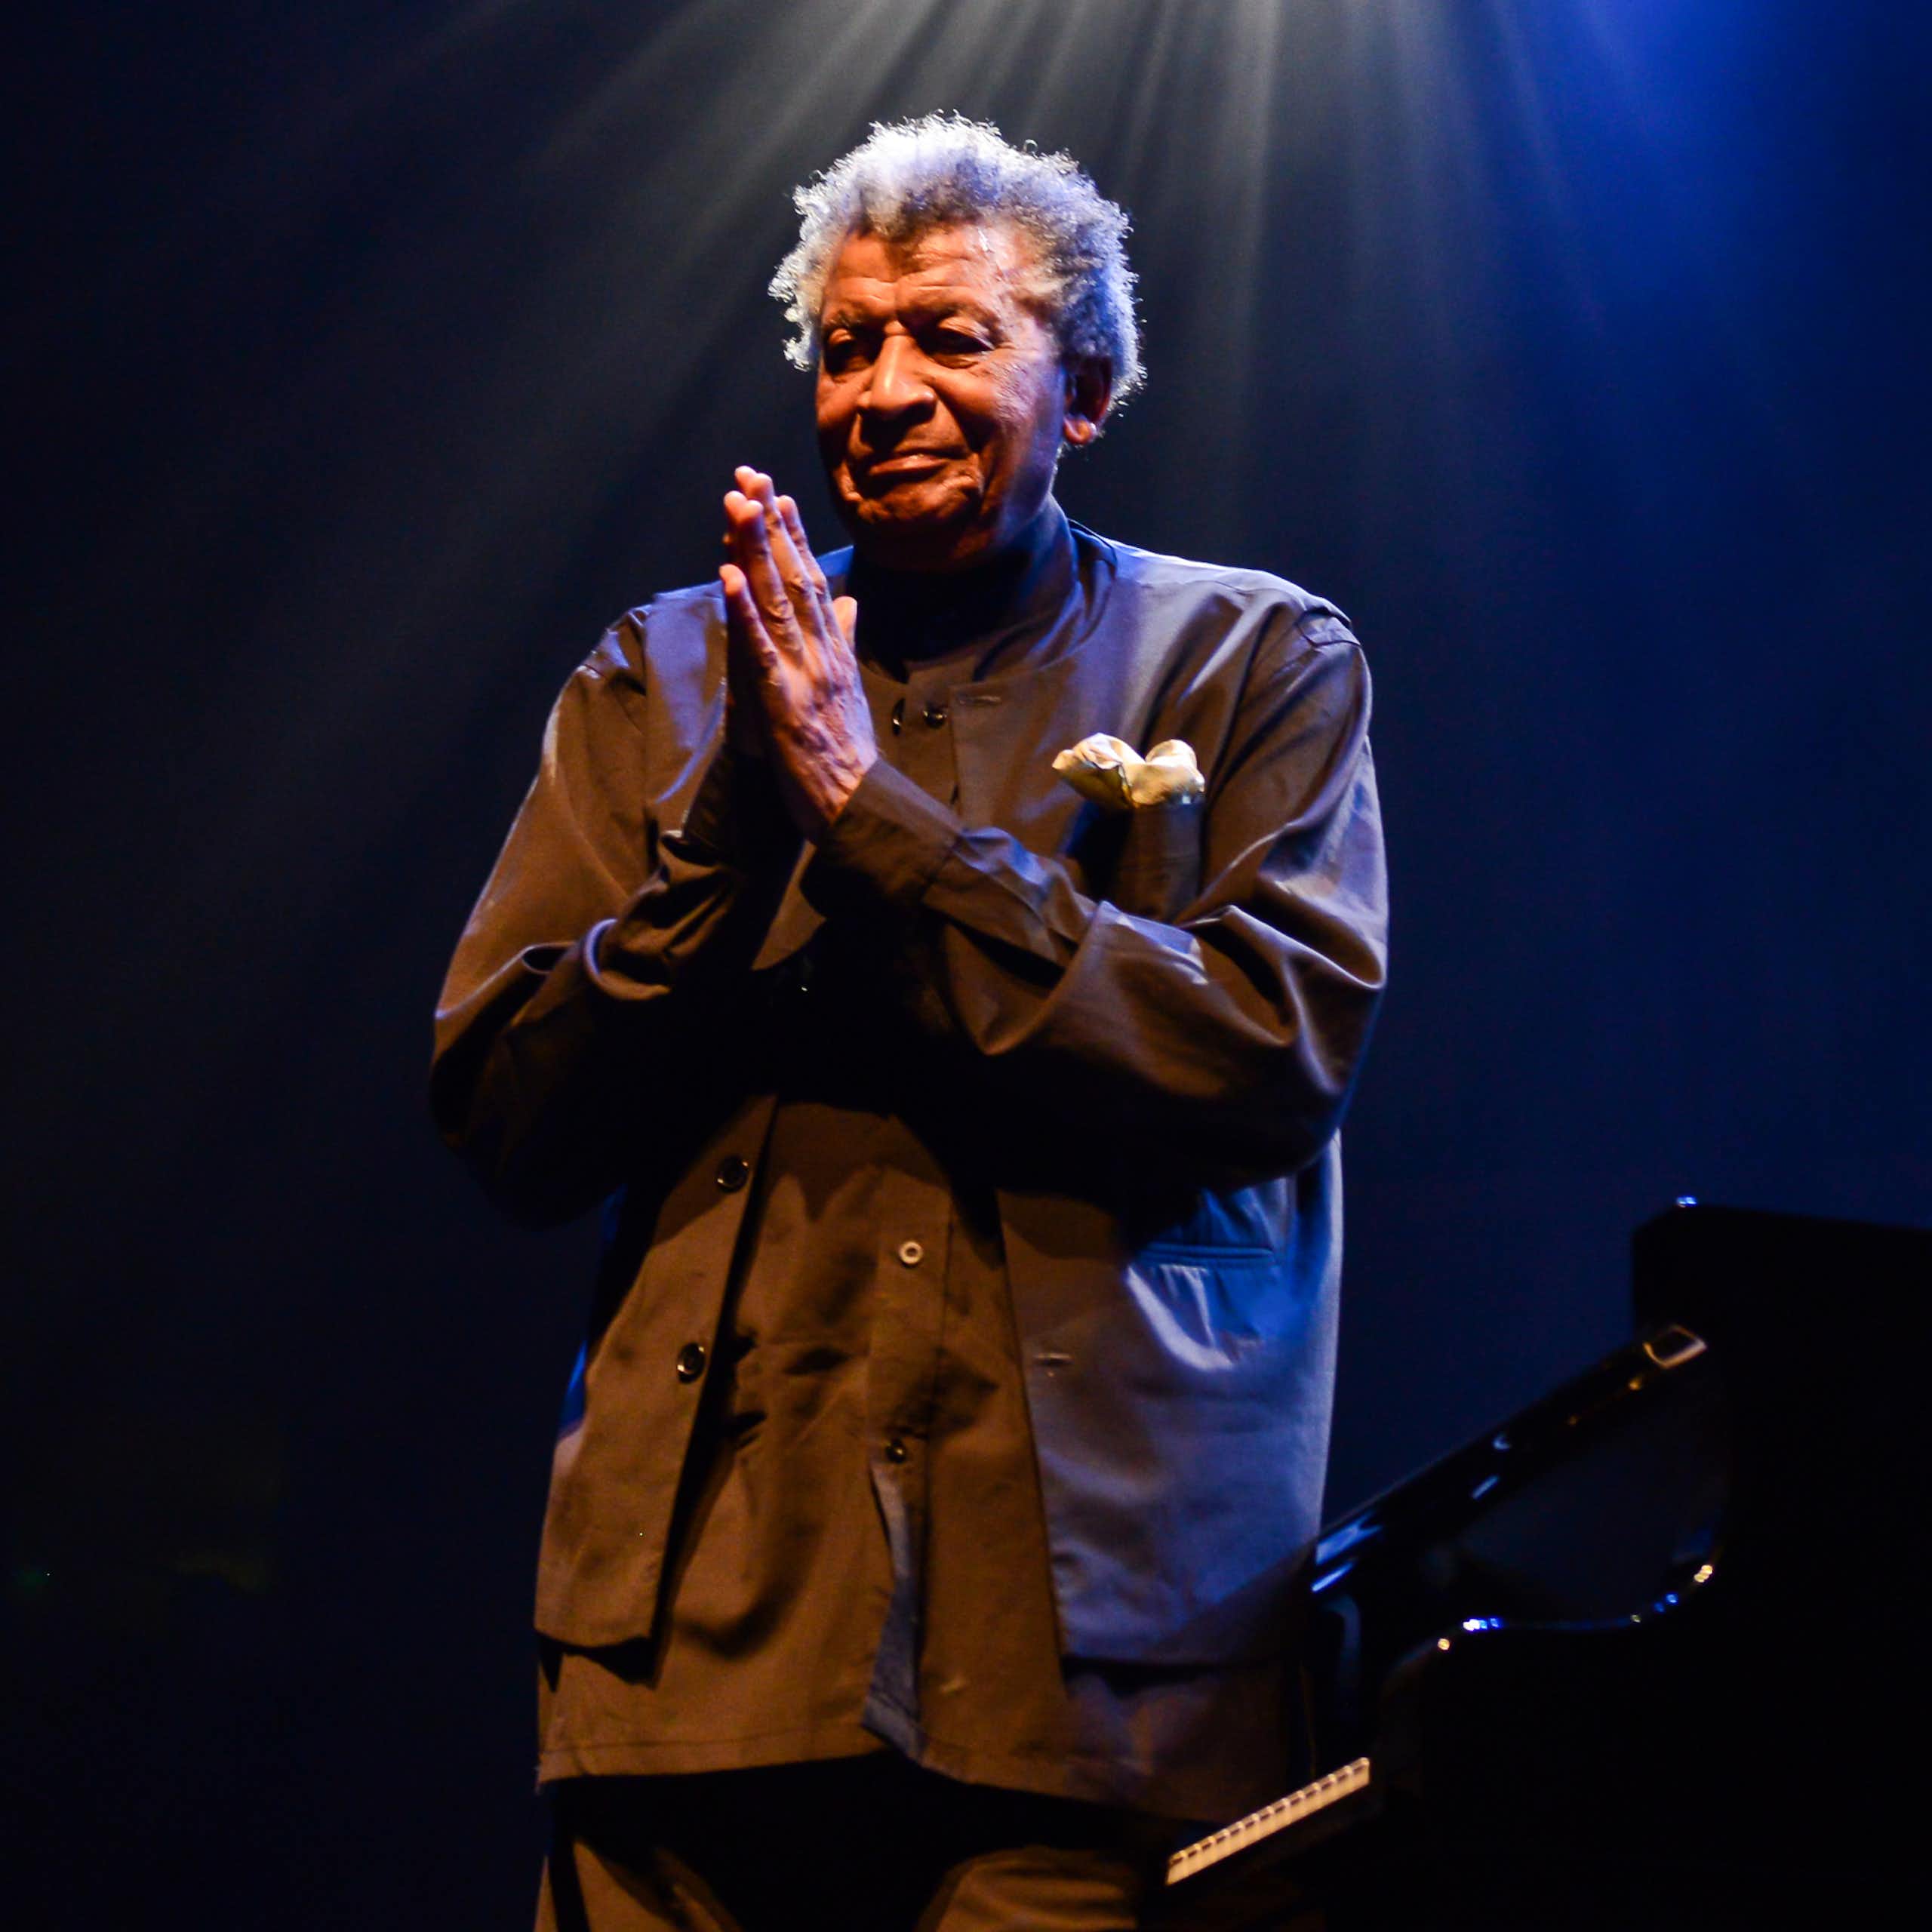 An elderly man with grey hair stands under a light on a stage next to a piano, hands in a thank-you prayer position in front of him.